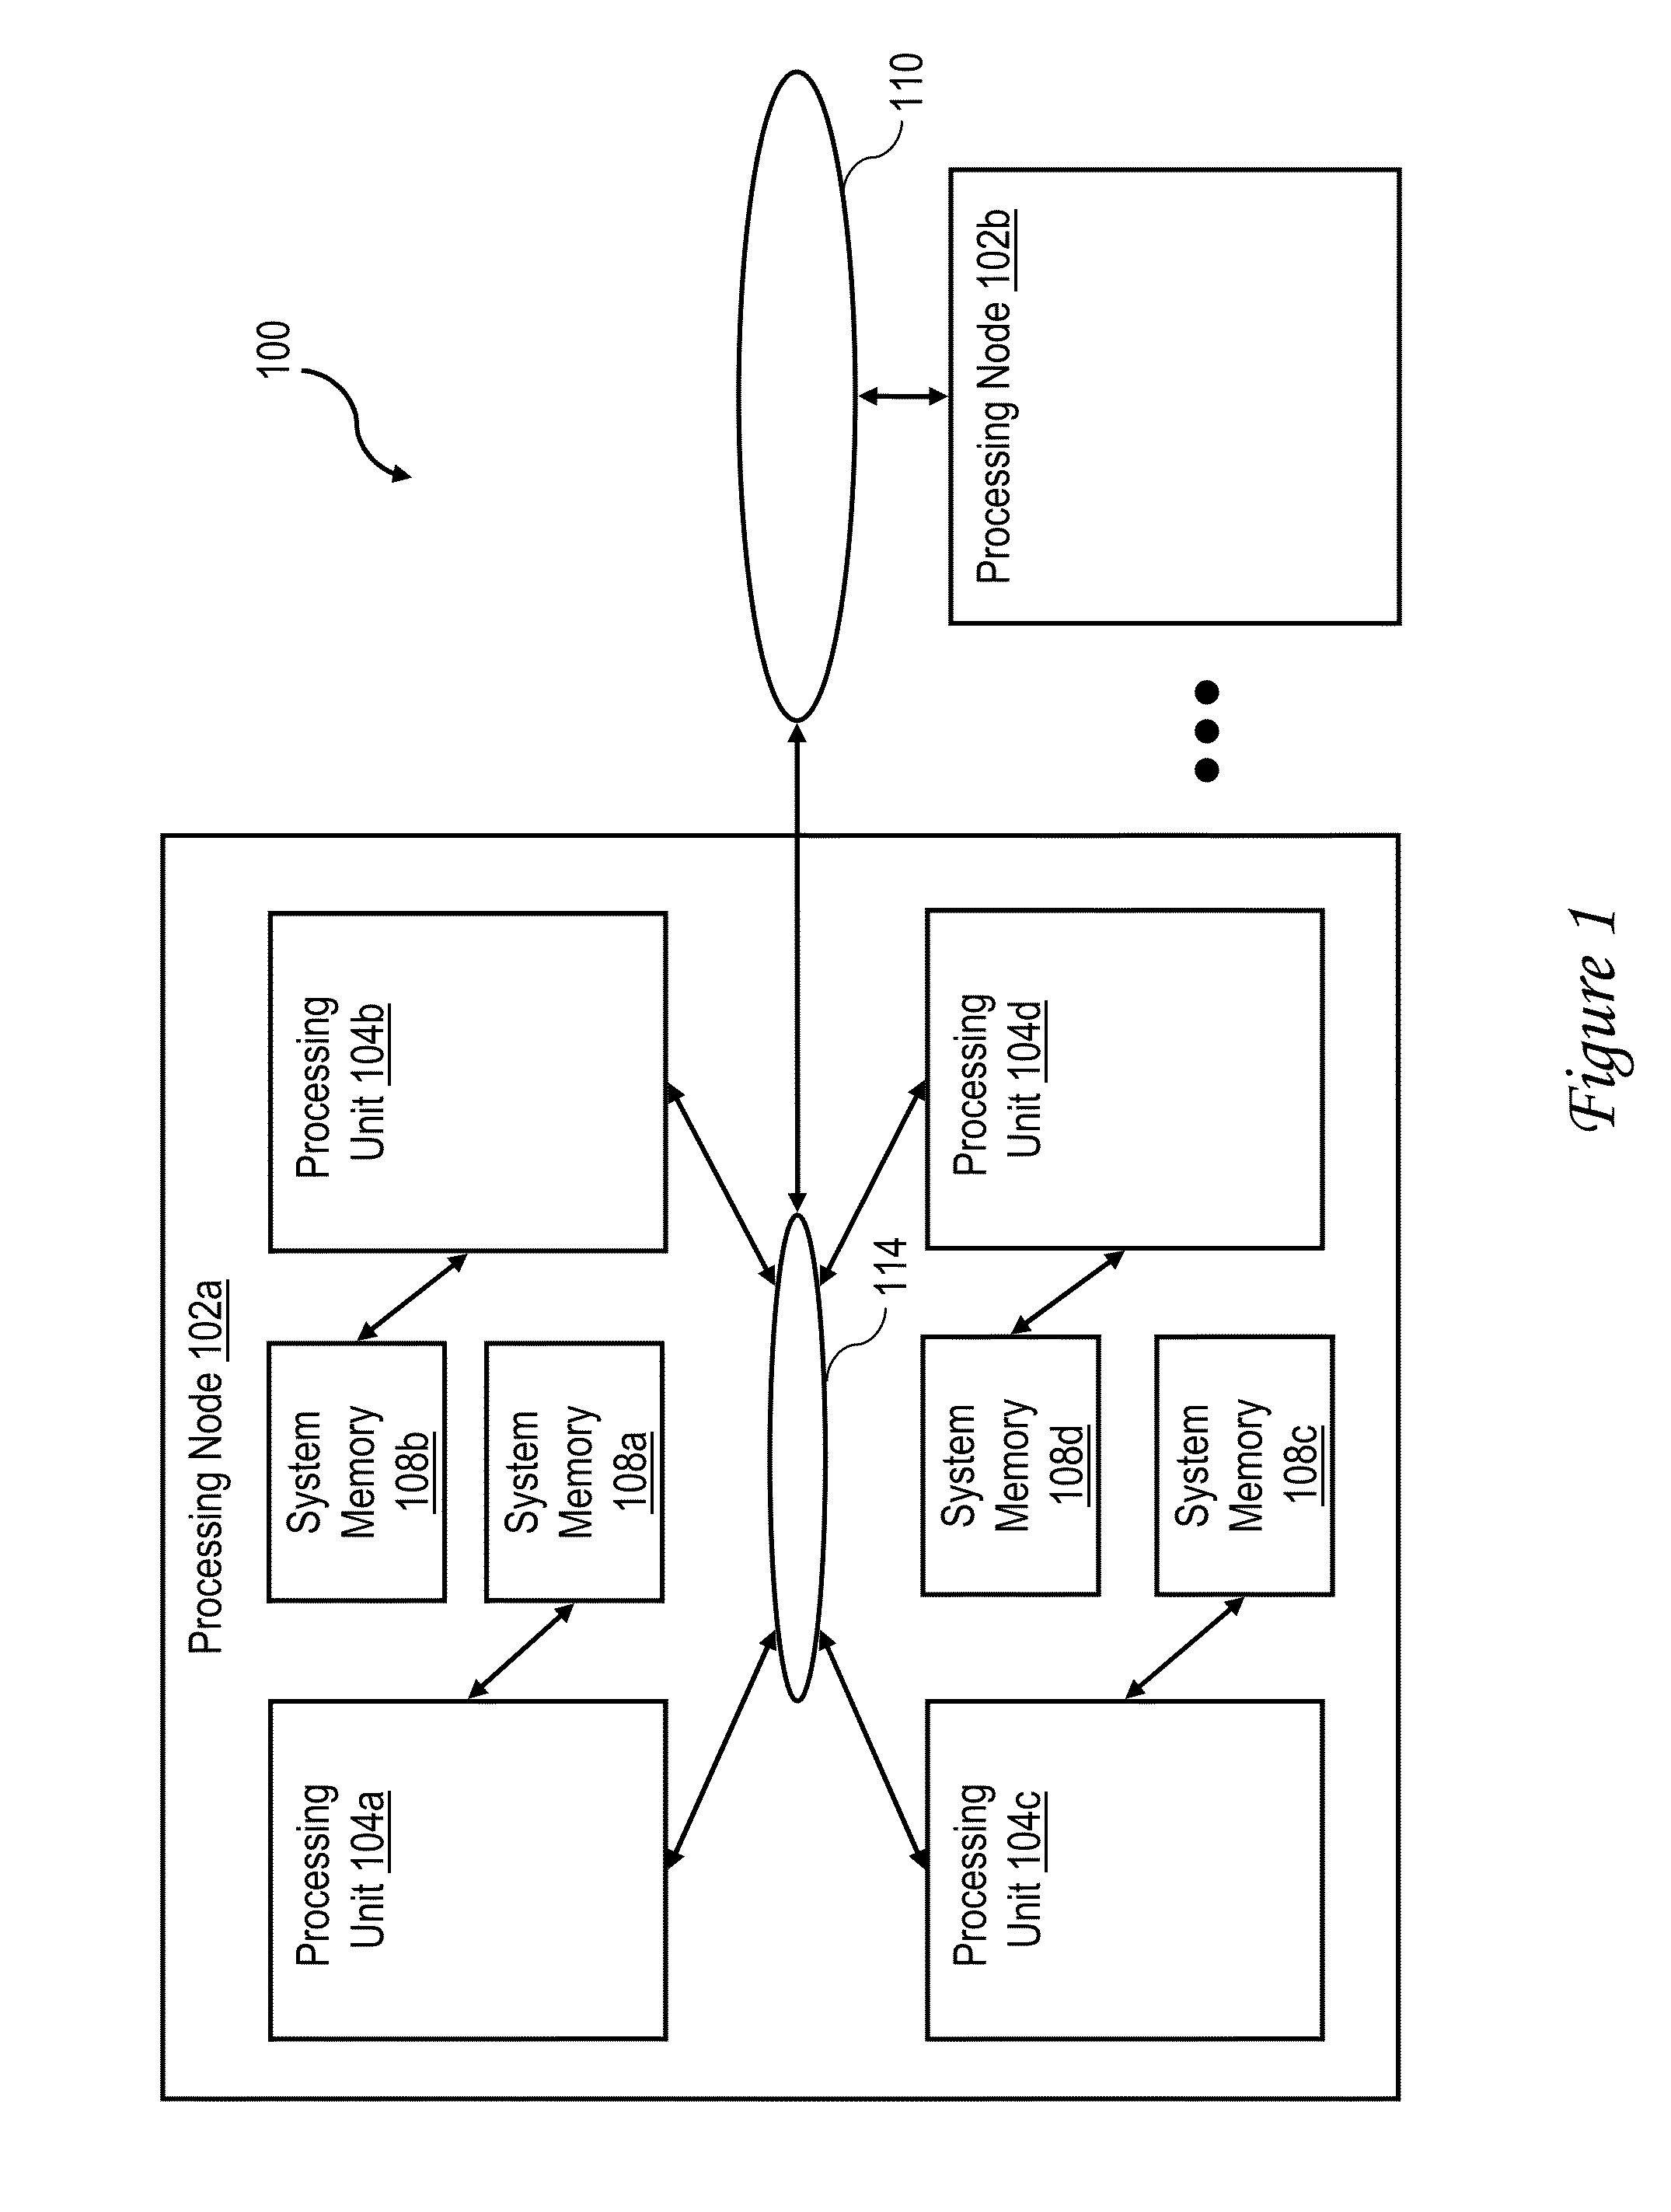 Management of transactional memory access requests by a cache memory